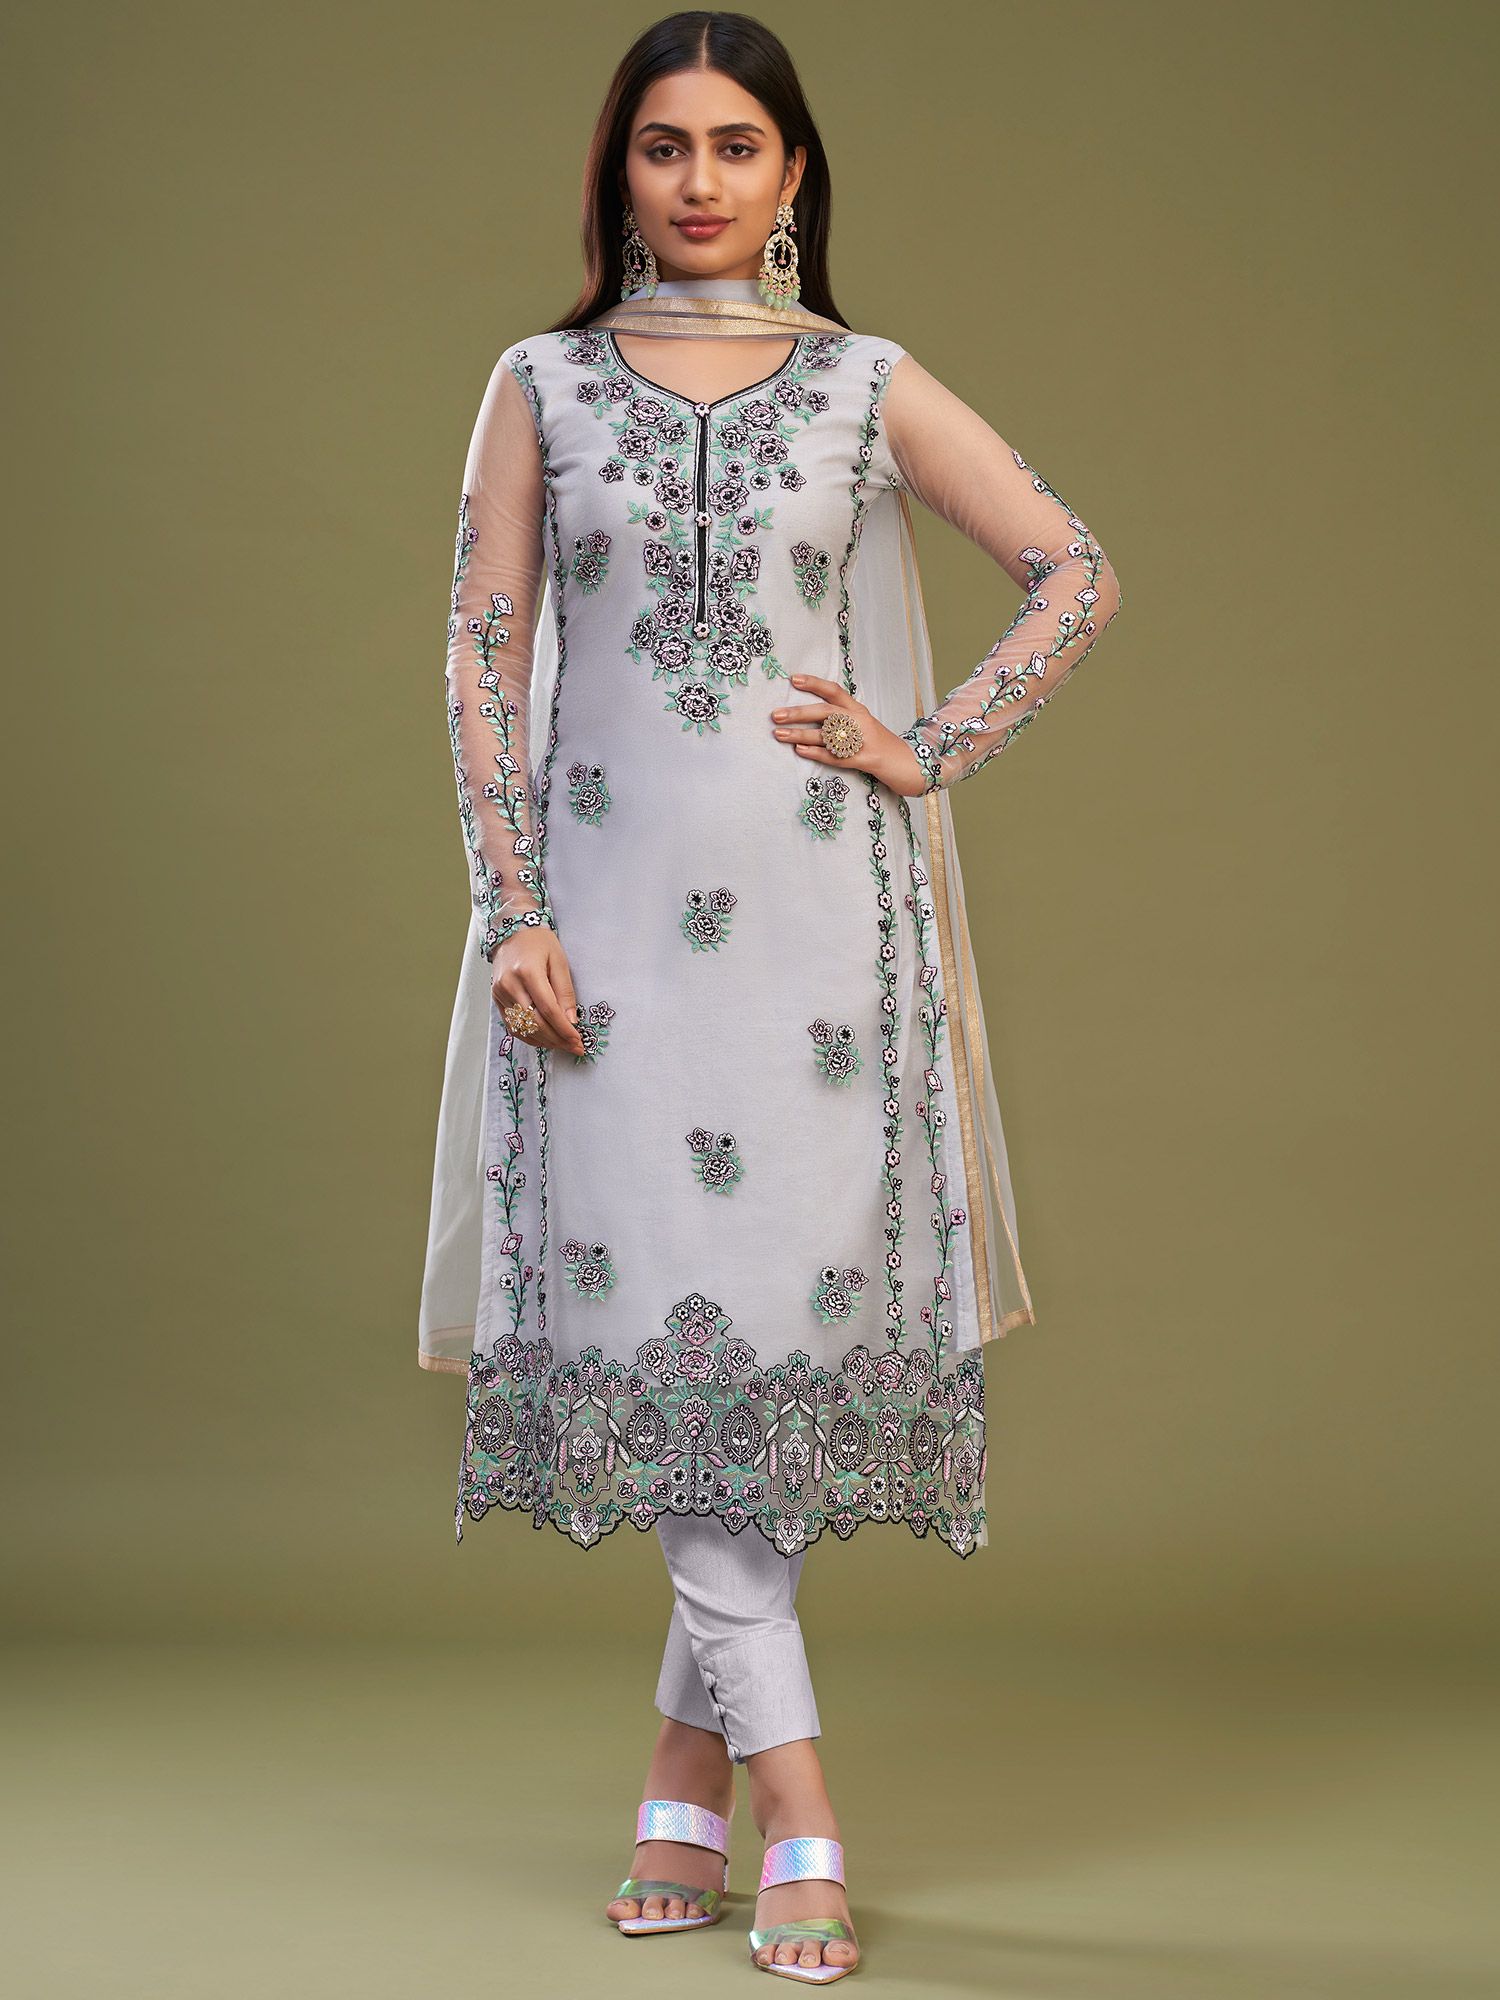 25 Latest Designer Kurti Designs for Women in Fashion 2023 | Indian party  wear gowns, Indian designer outfits, Indian fashion